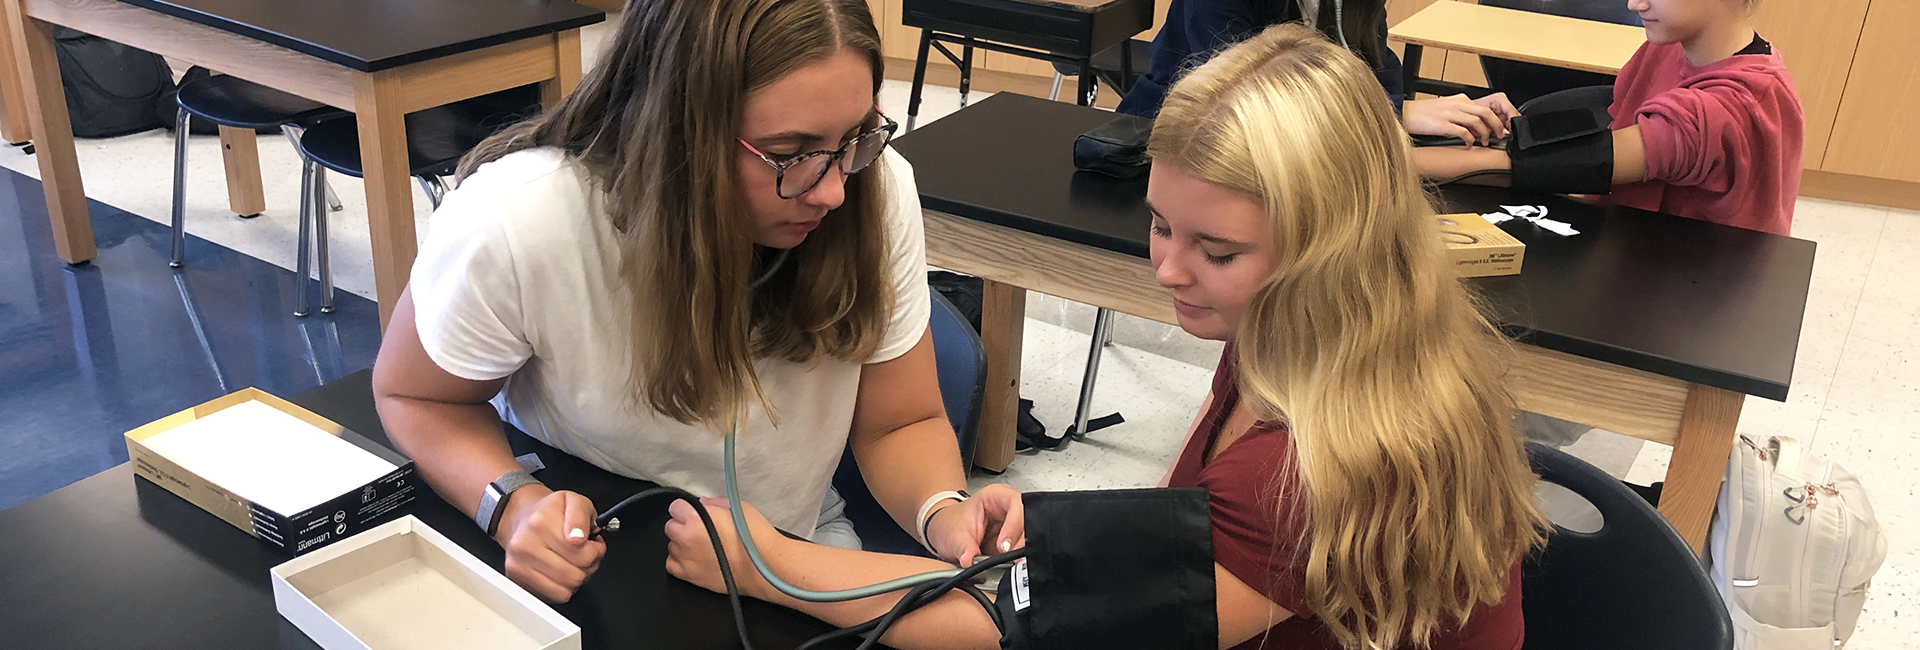 student taking pulse of other student